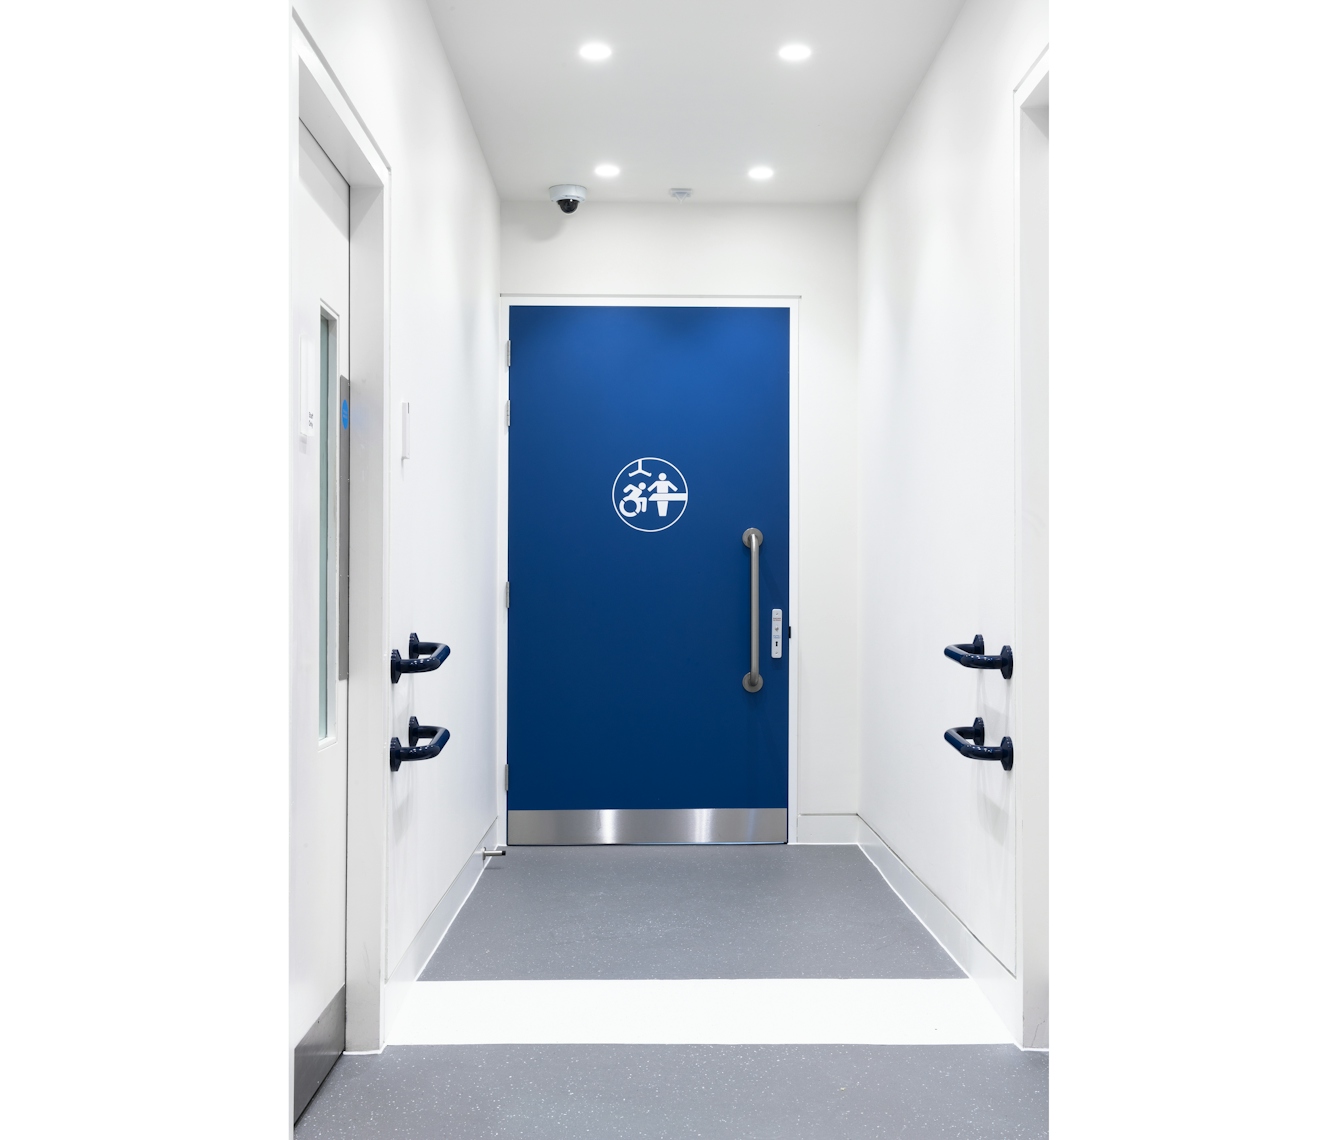 A photograph of the Changing Places toilet with a white logo showing a wheelchair, adult changing table, and a hoist on a large blue door with parallel blue hand rails on adjacent walls.